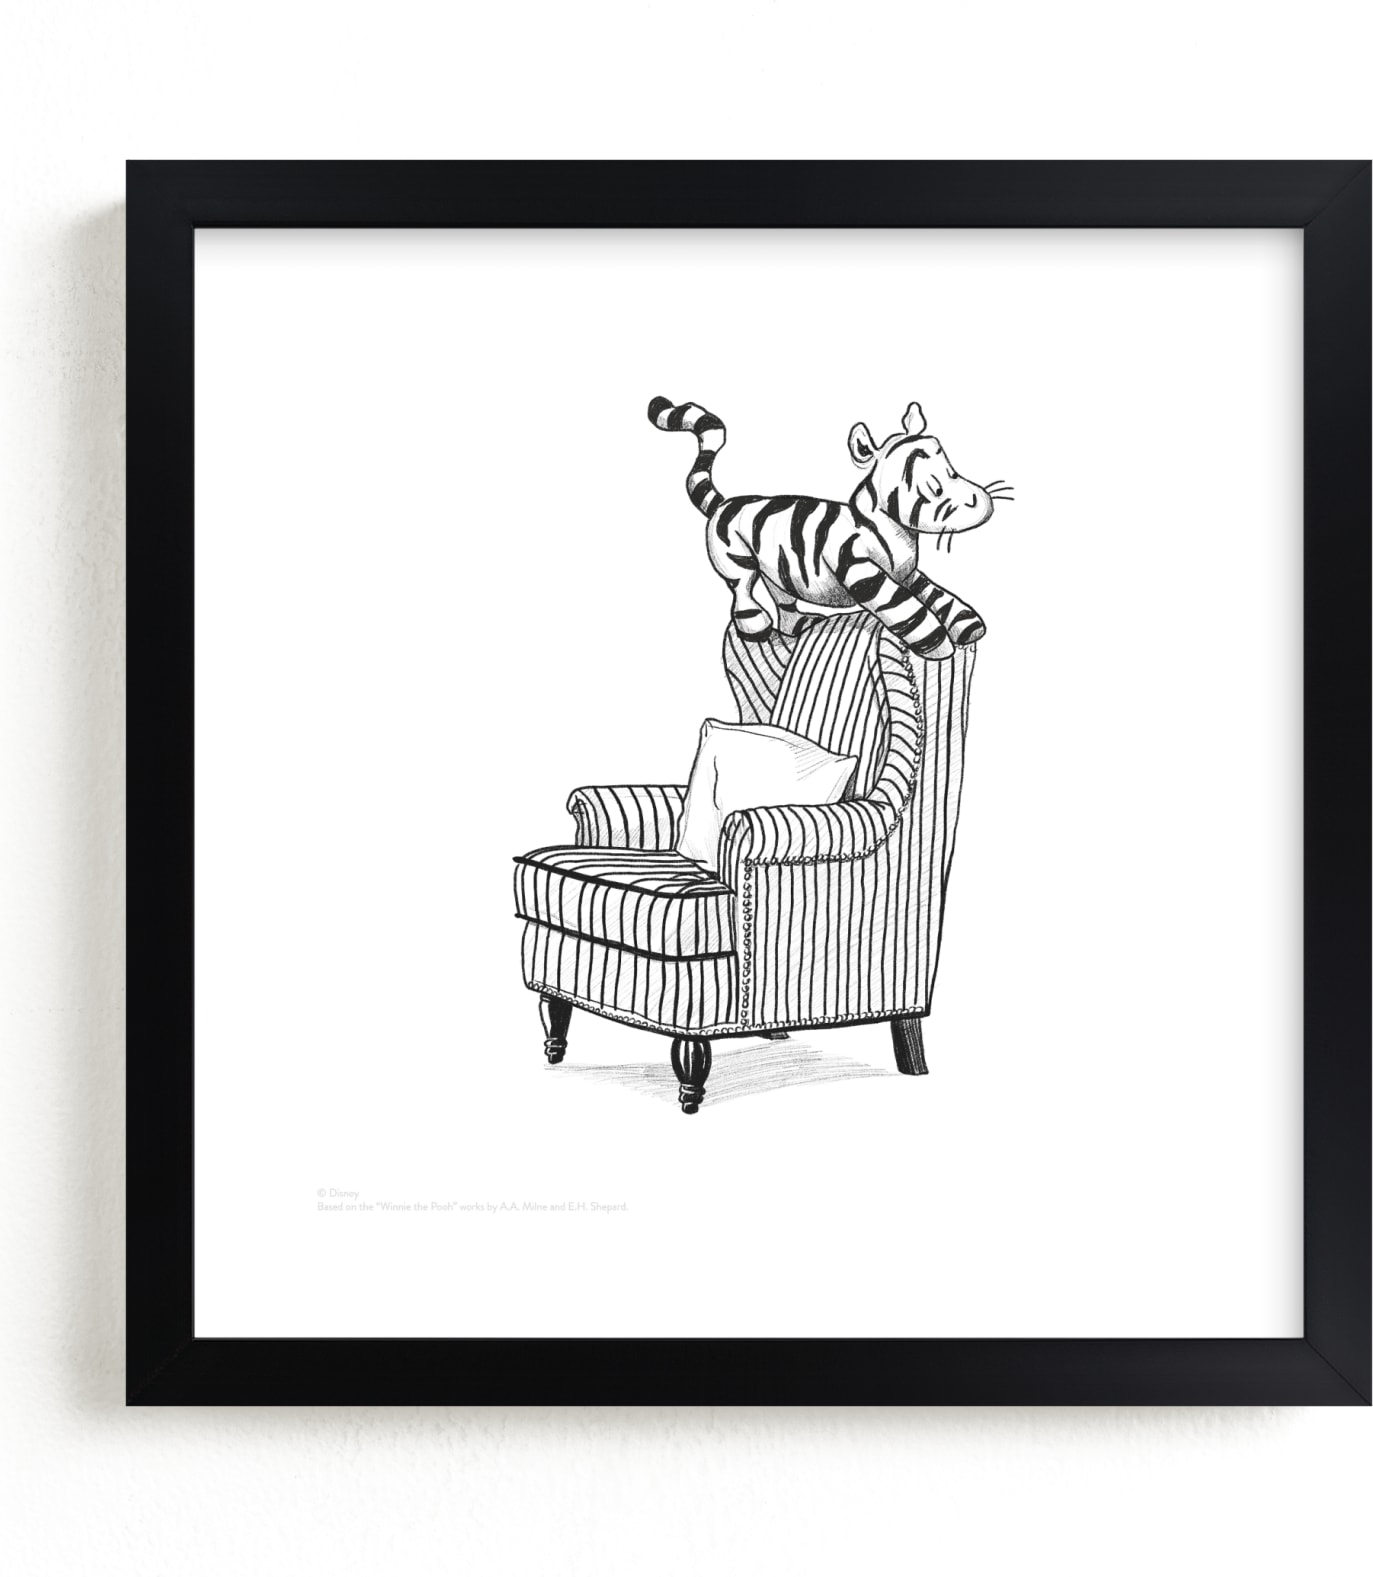 This is a black and white, white disney art by Stefanie Lane called Tigger Lounging from Disney's Winnie The Pooh.